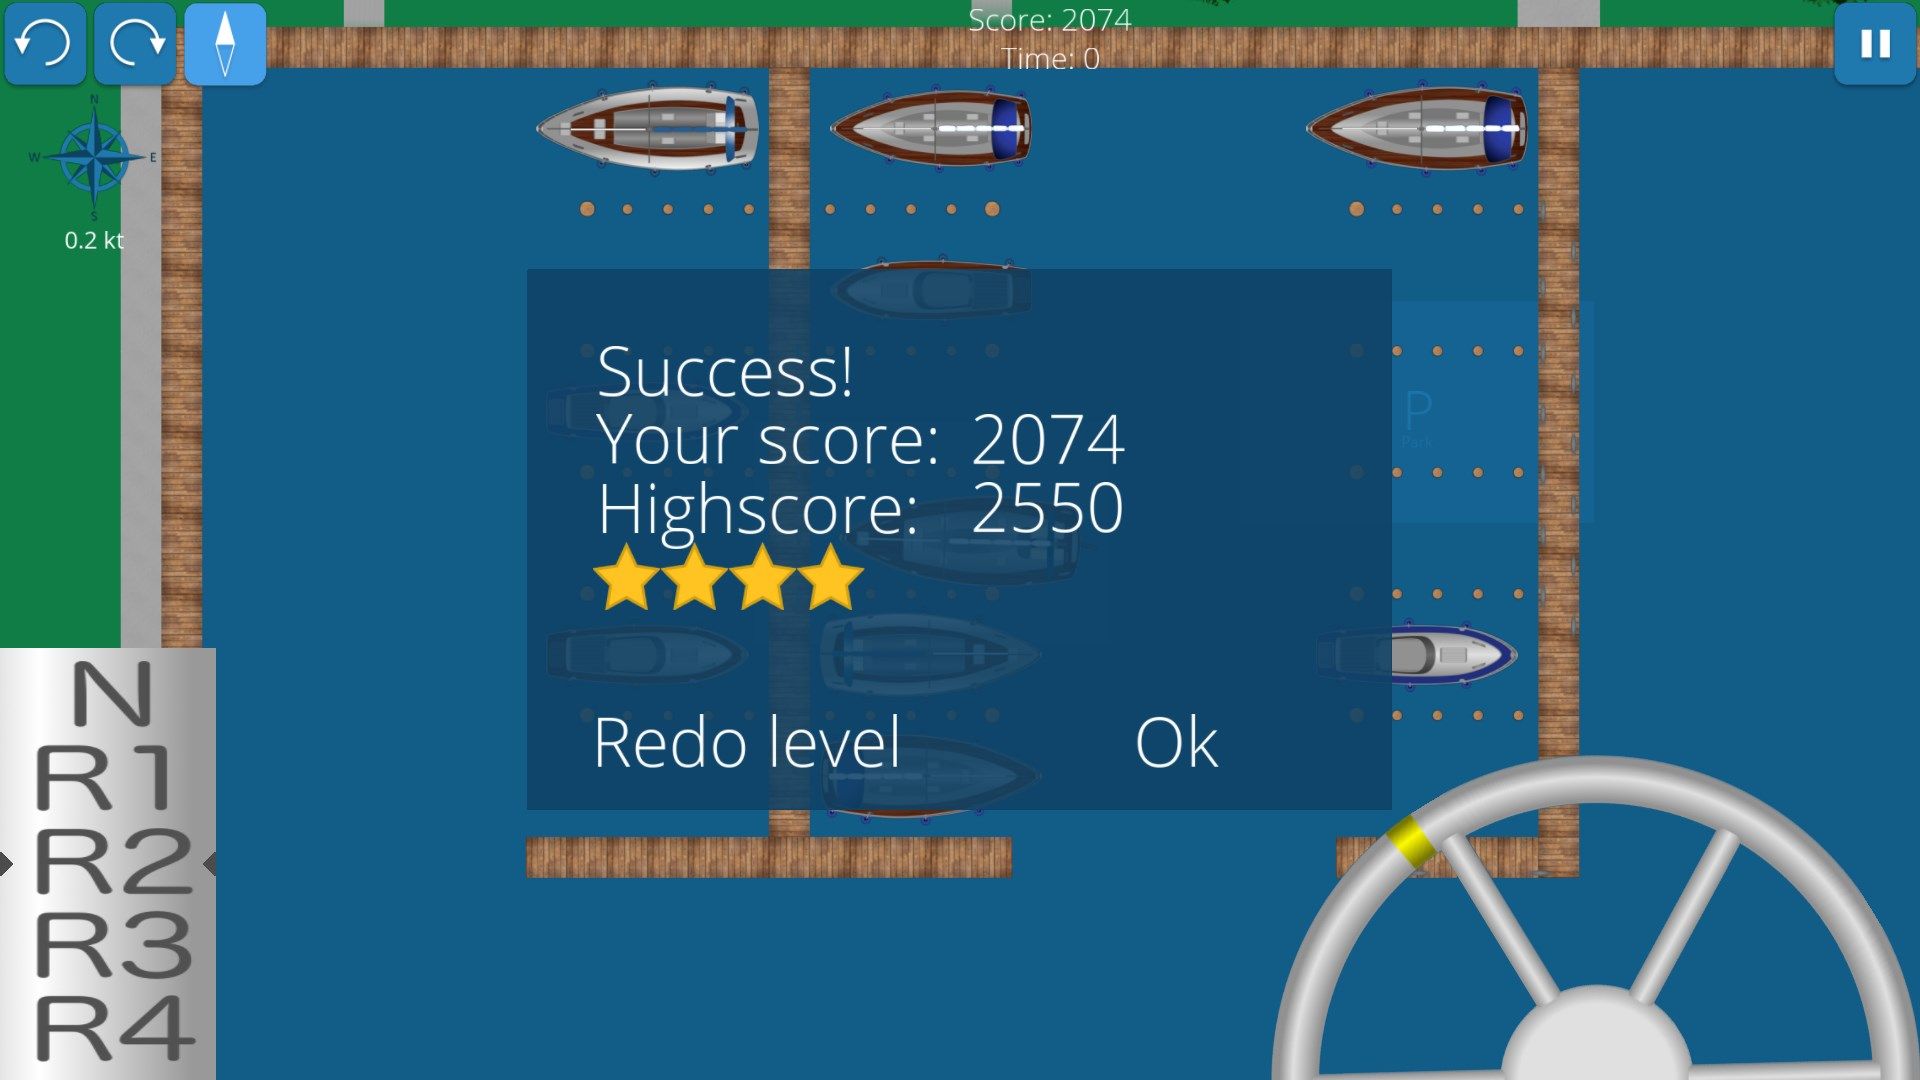 Maneuver quick and avoid collisions for a good score